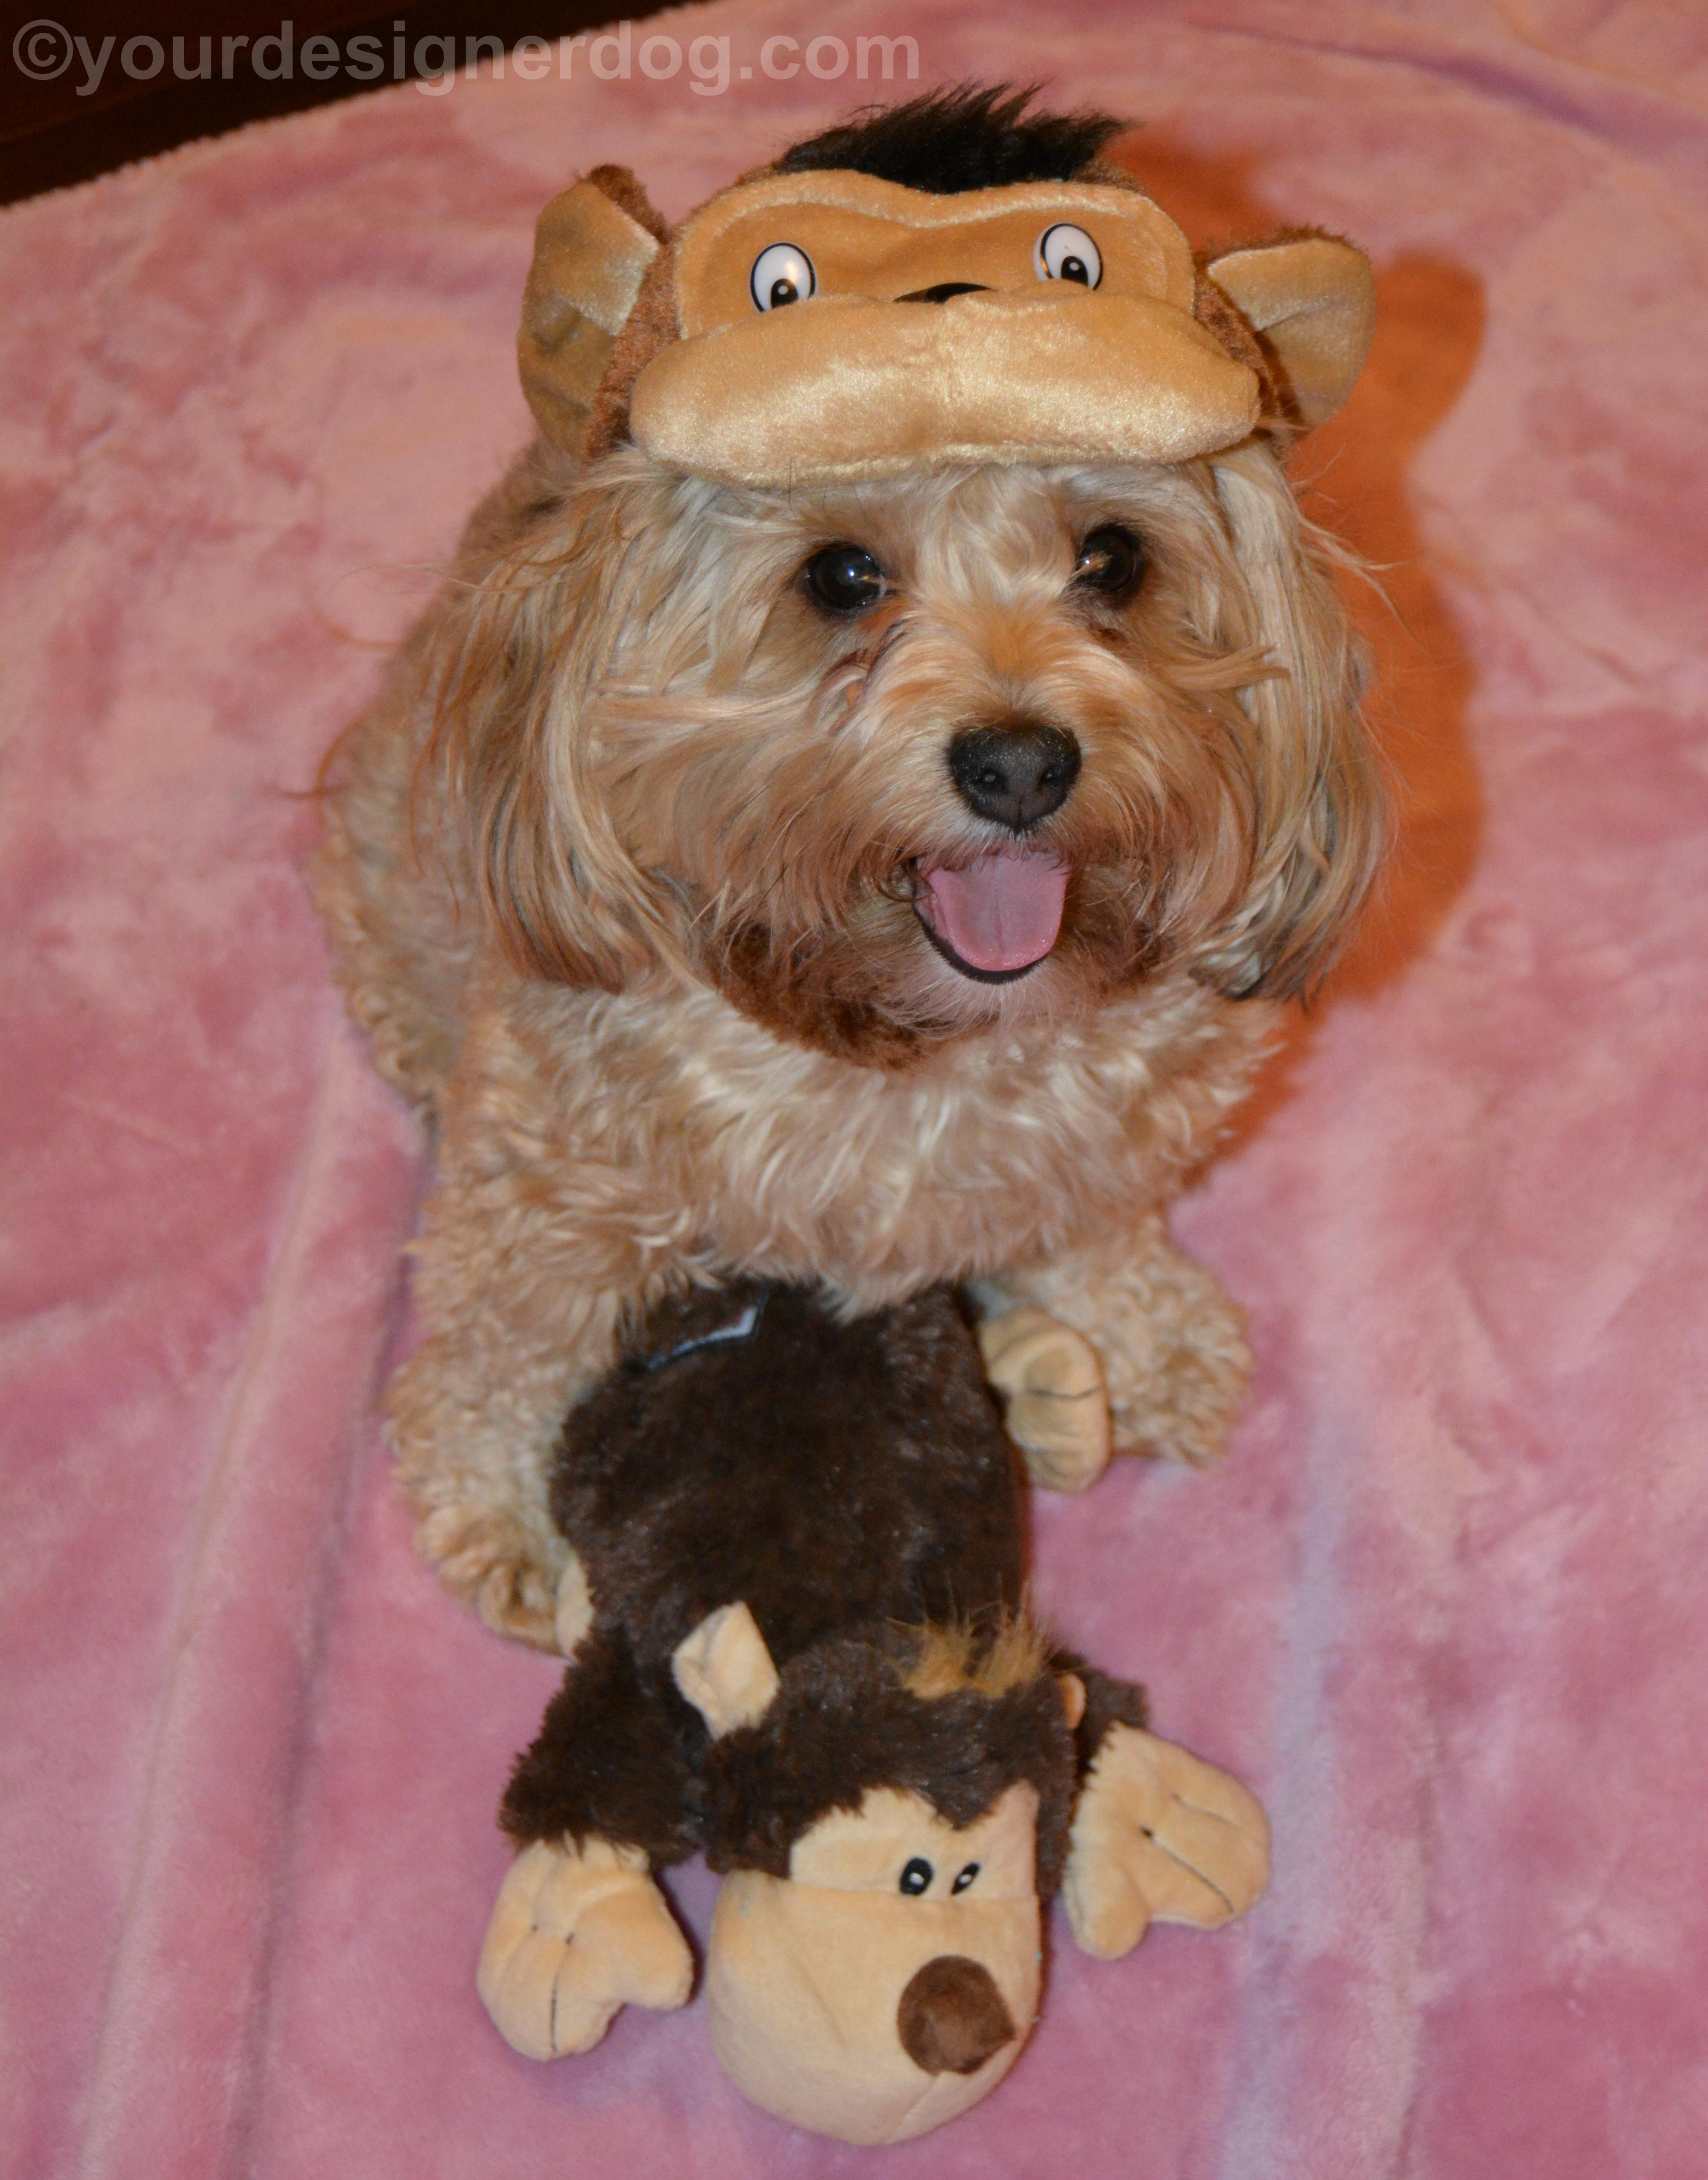 dogs, designer dogs, yorkipoo, yorkie poo, monkey, dog costume, tongue out